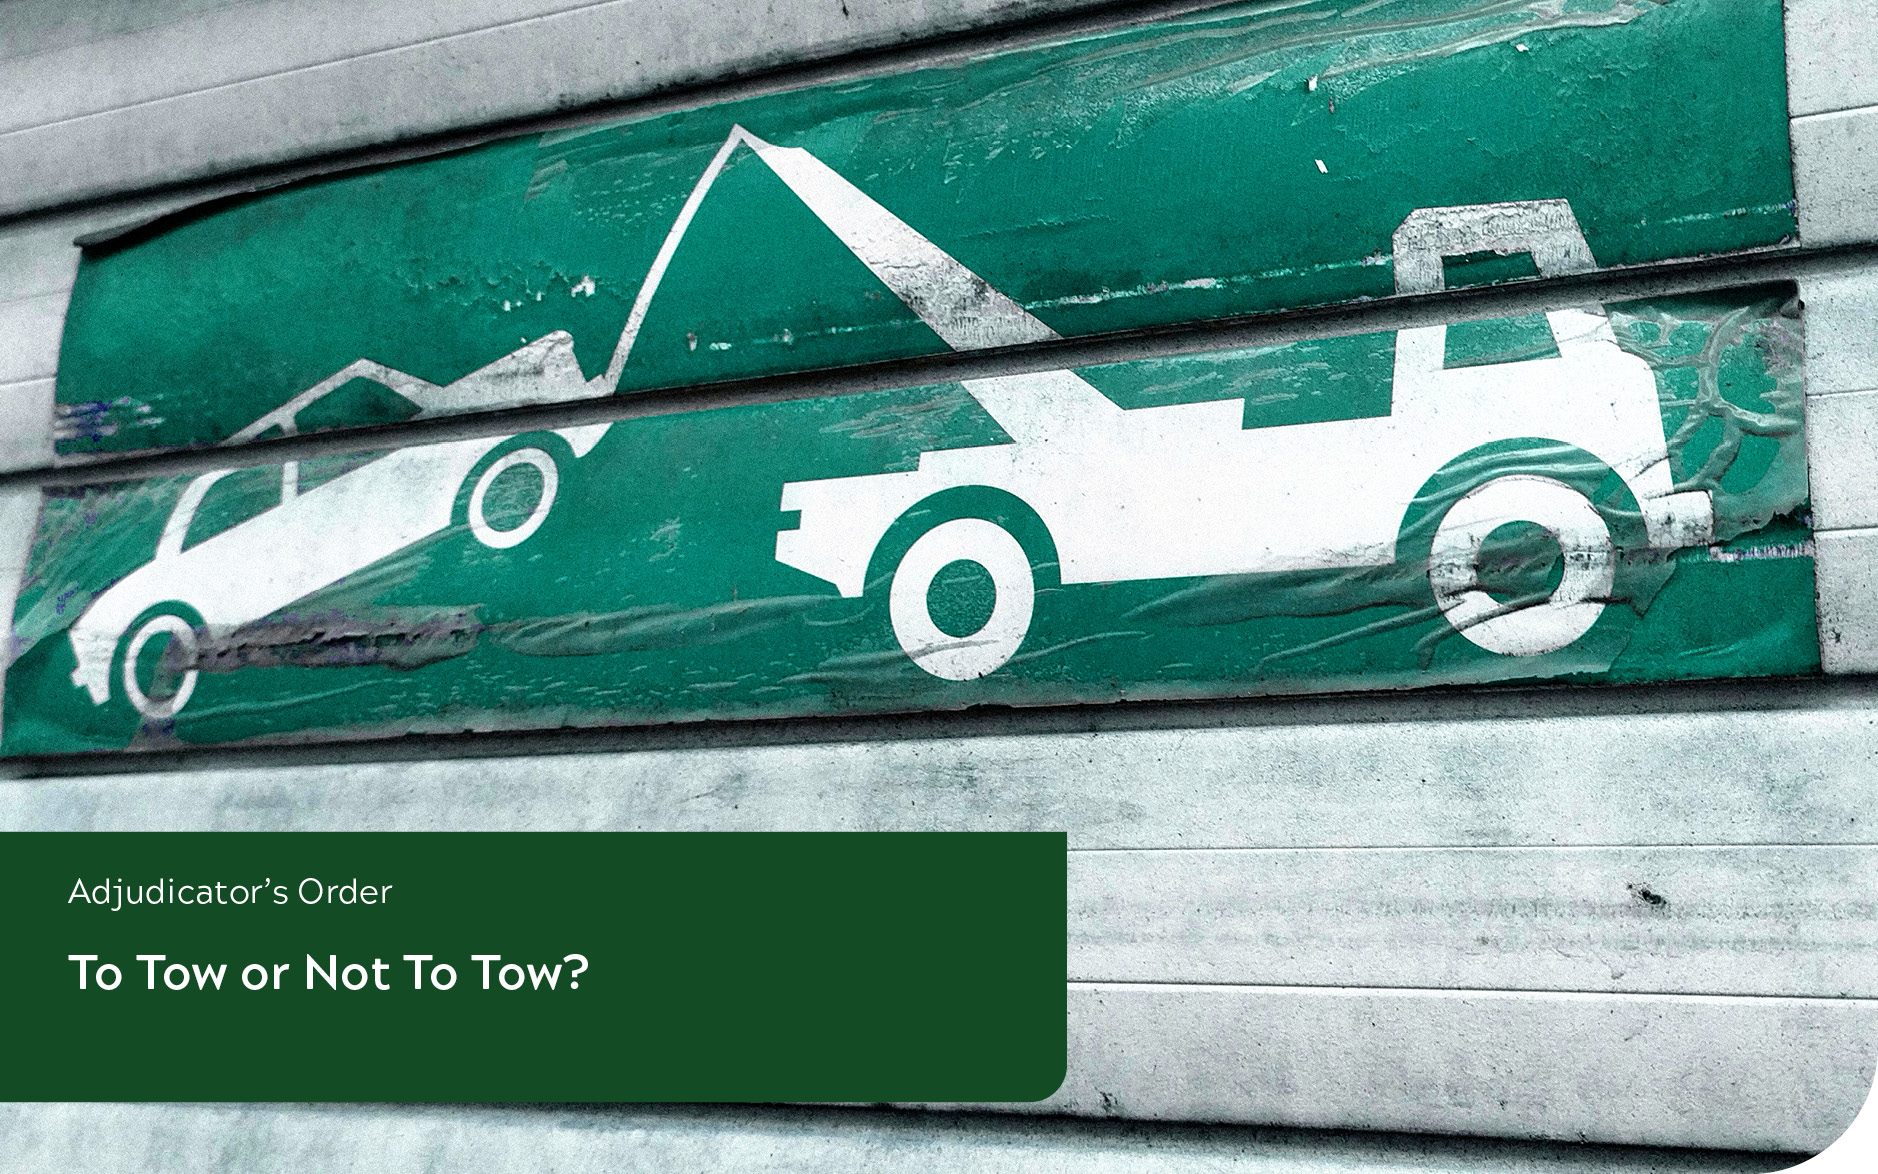 To tow or not to tow – should the Committee seek a declaration from the Commissioner’s Office?